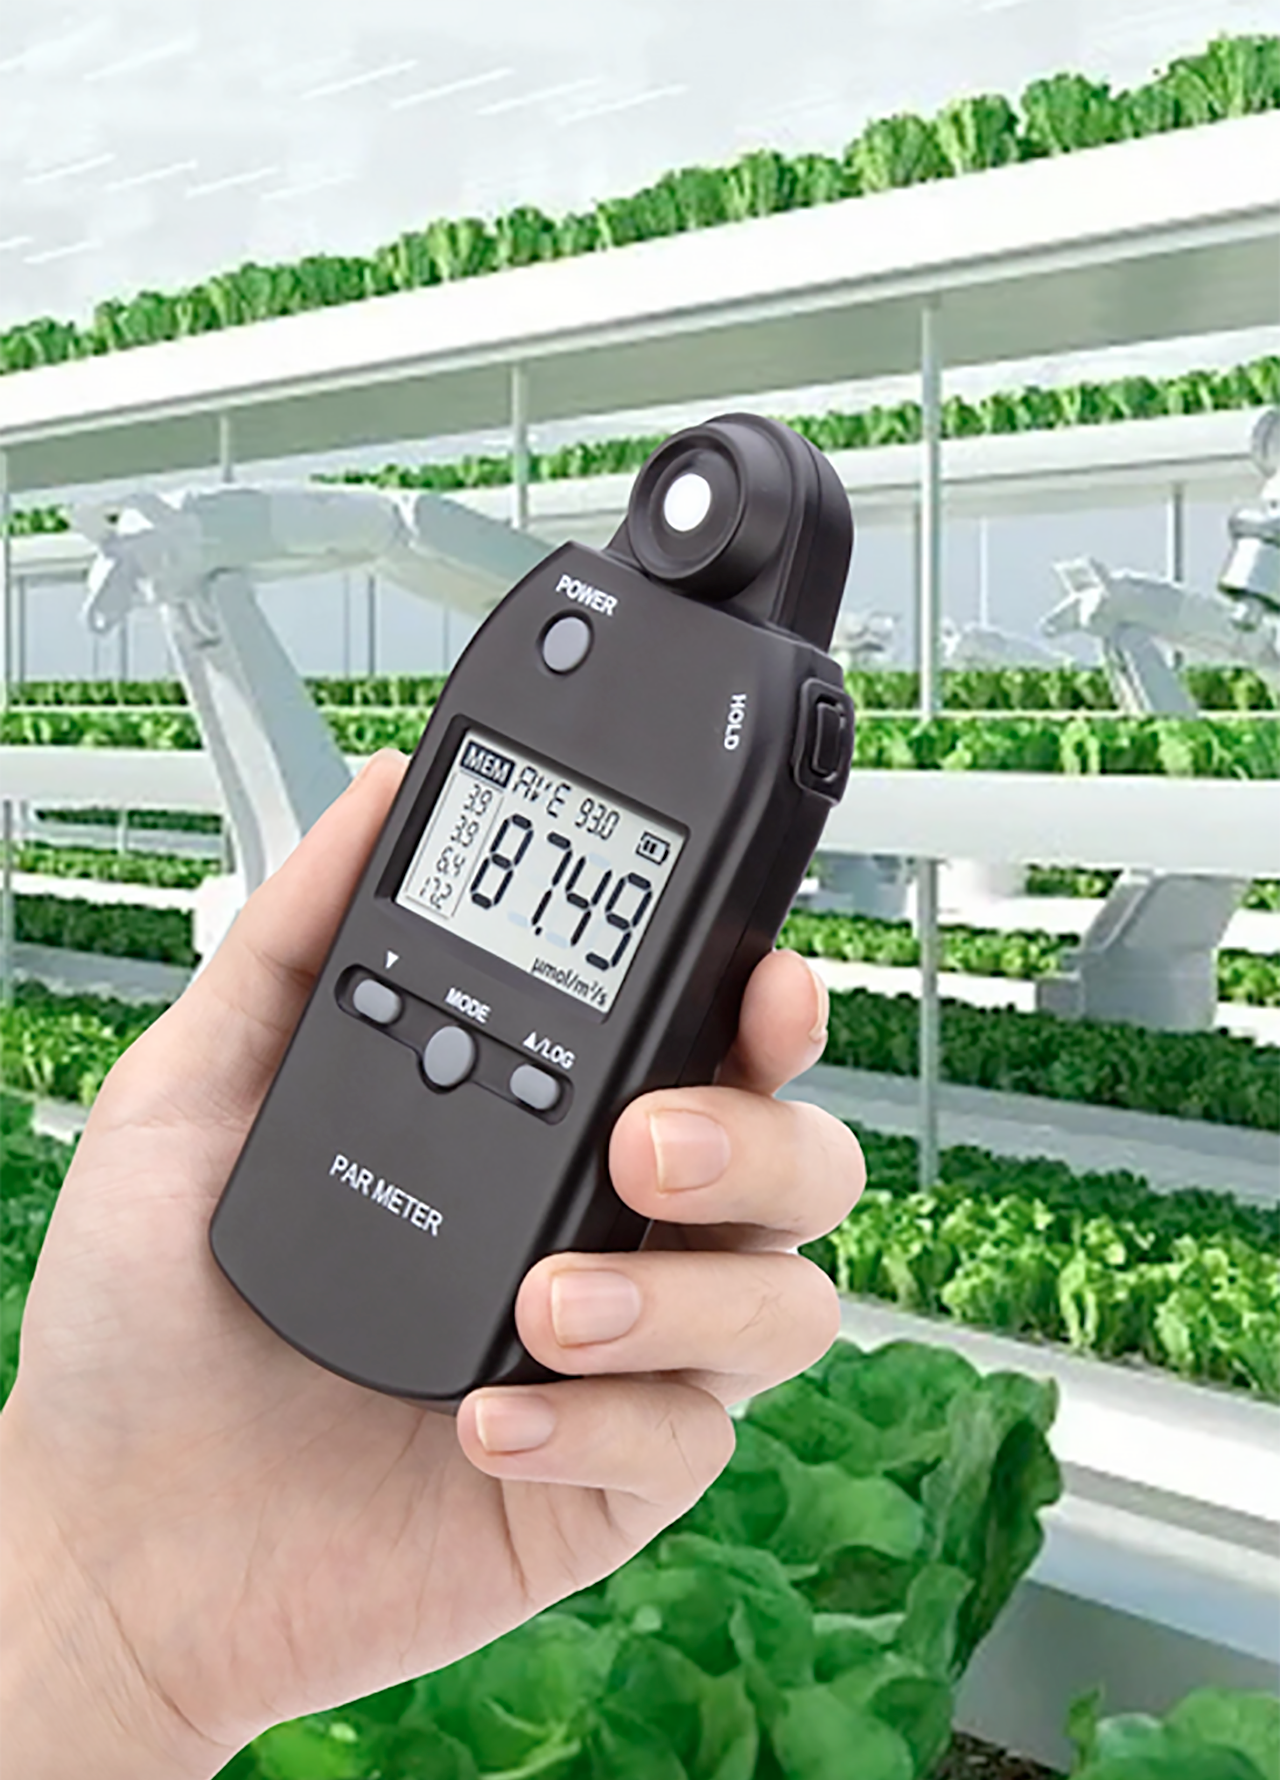 1280x1780px-Lux-meting-in-a-greenhouse-vWA24